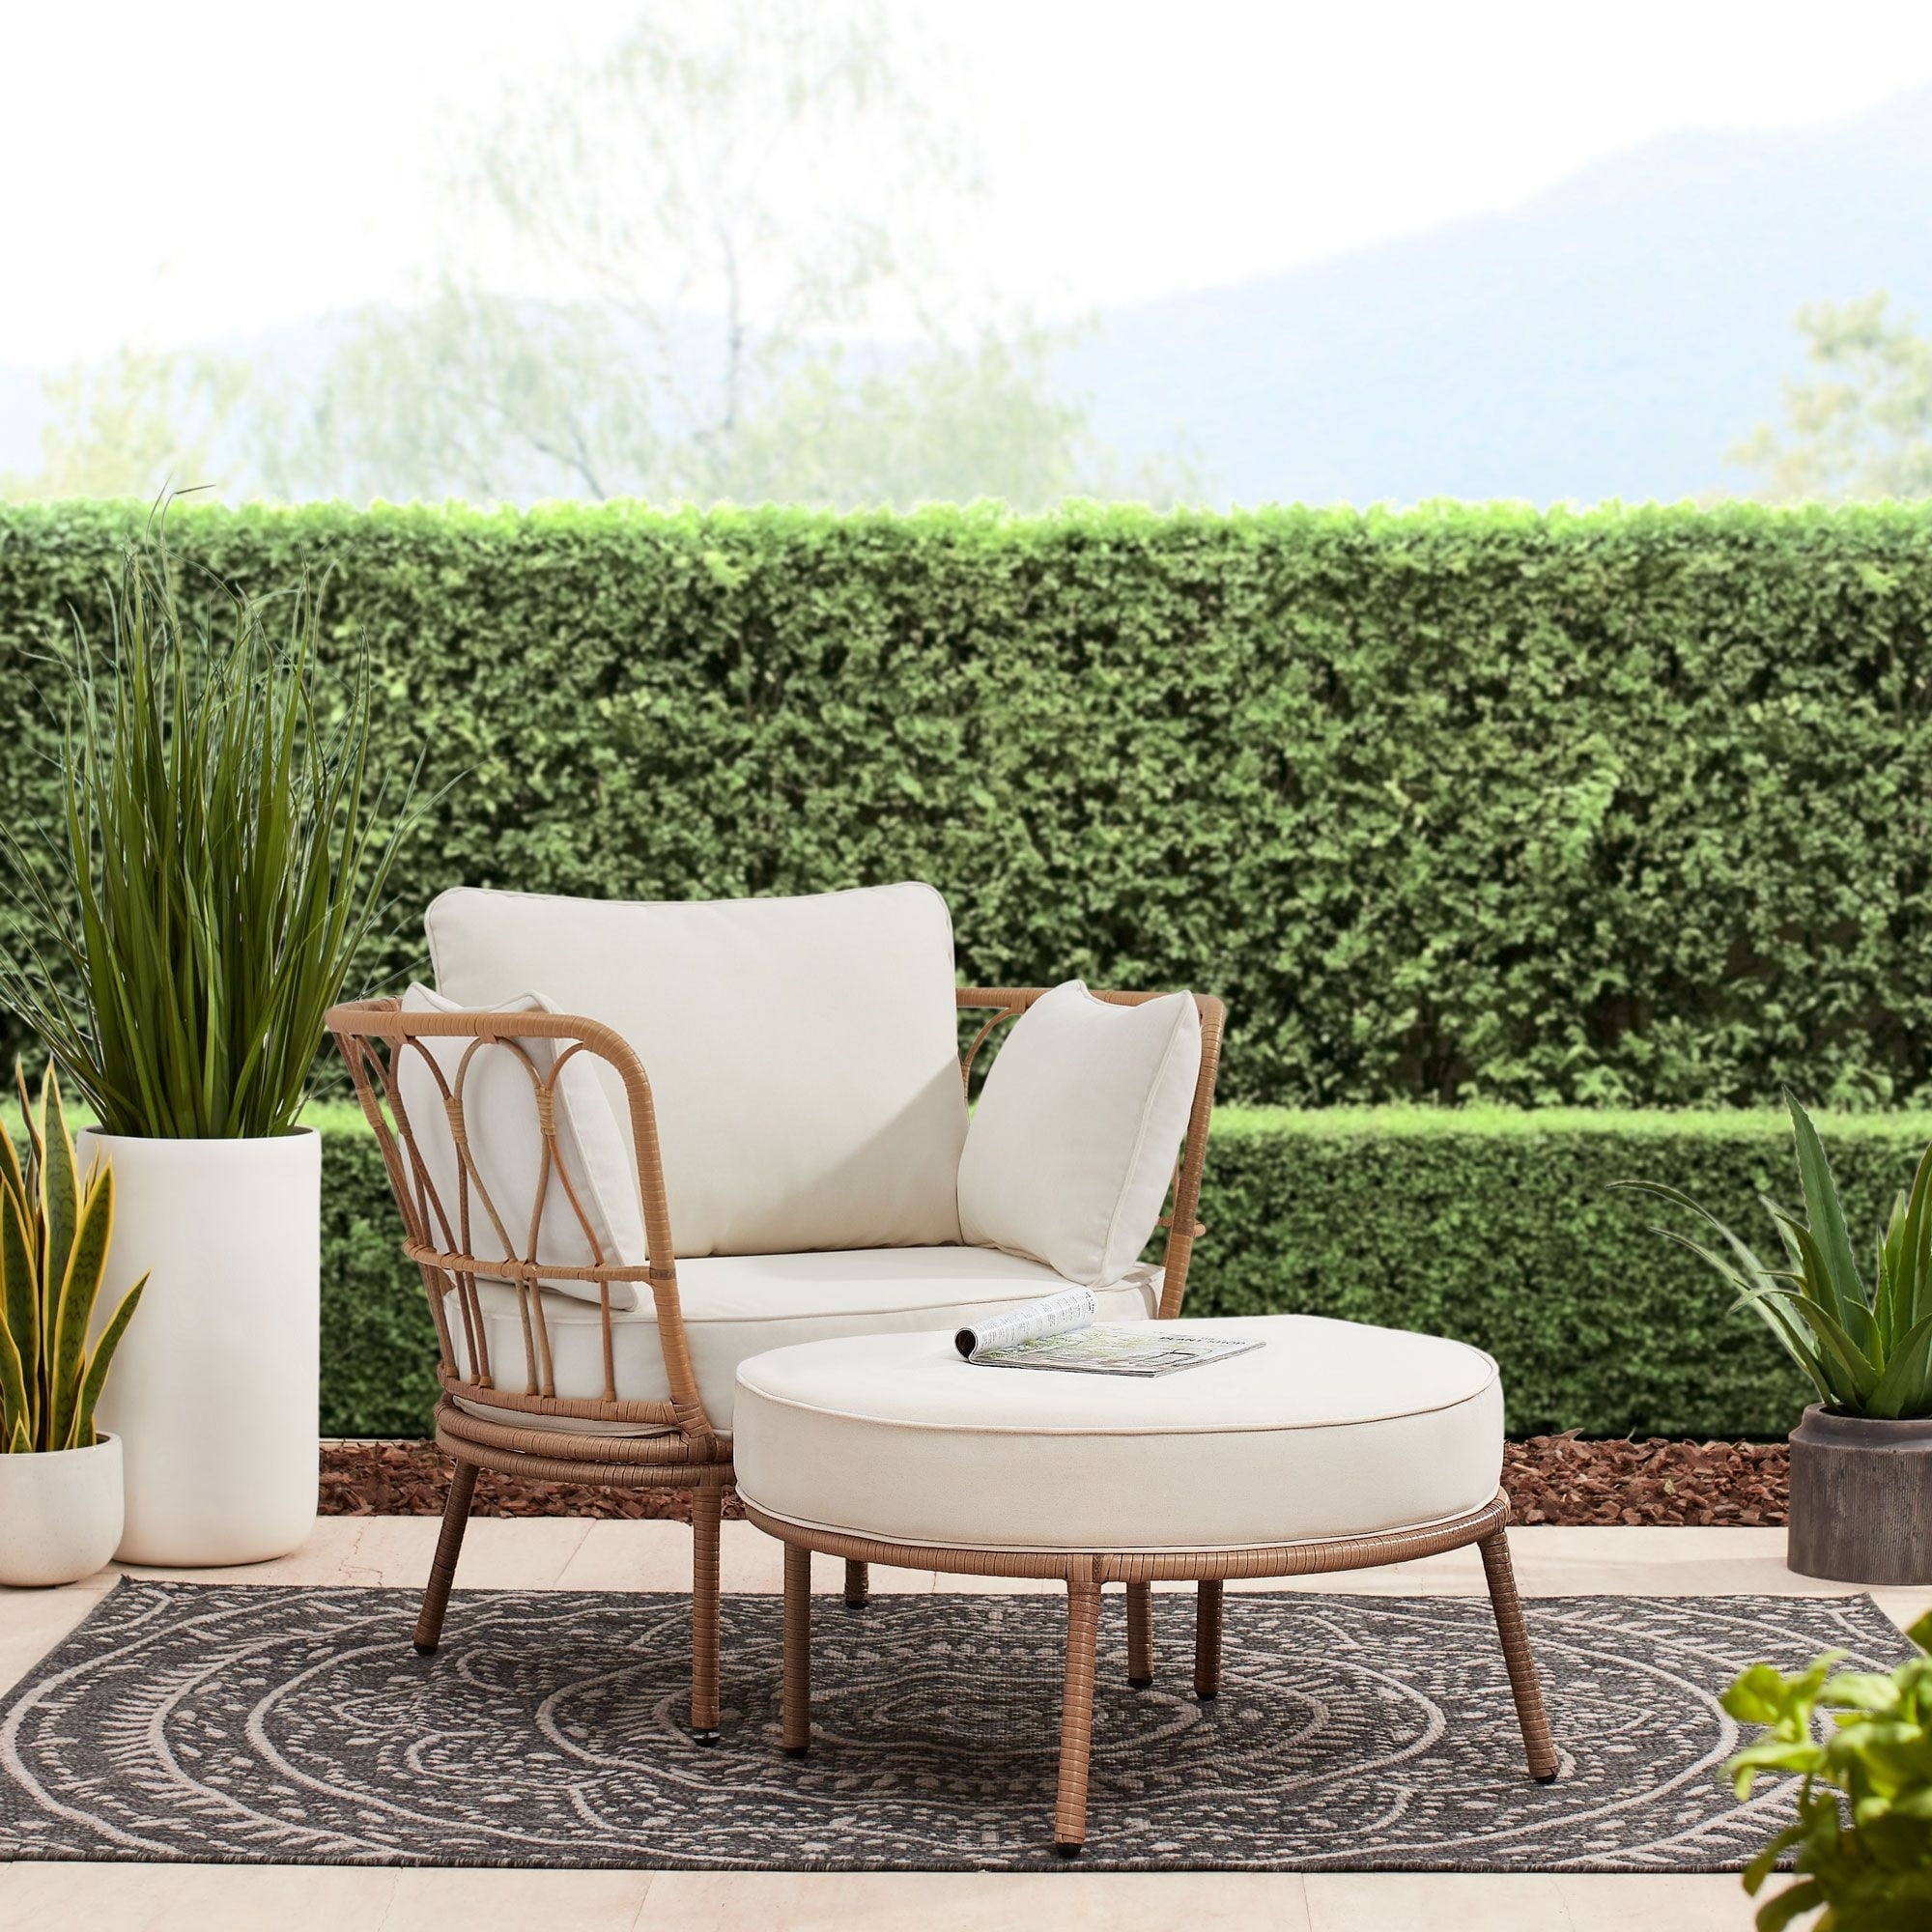 the beige and wicker chair and ottoman set